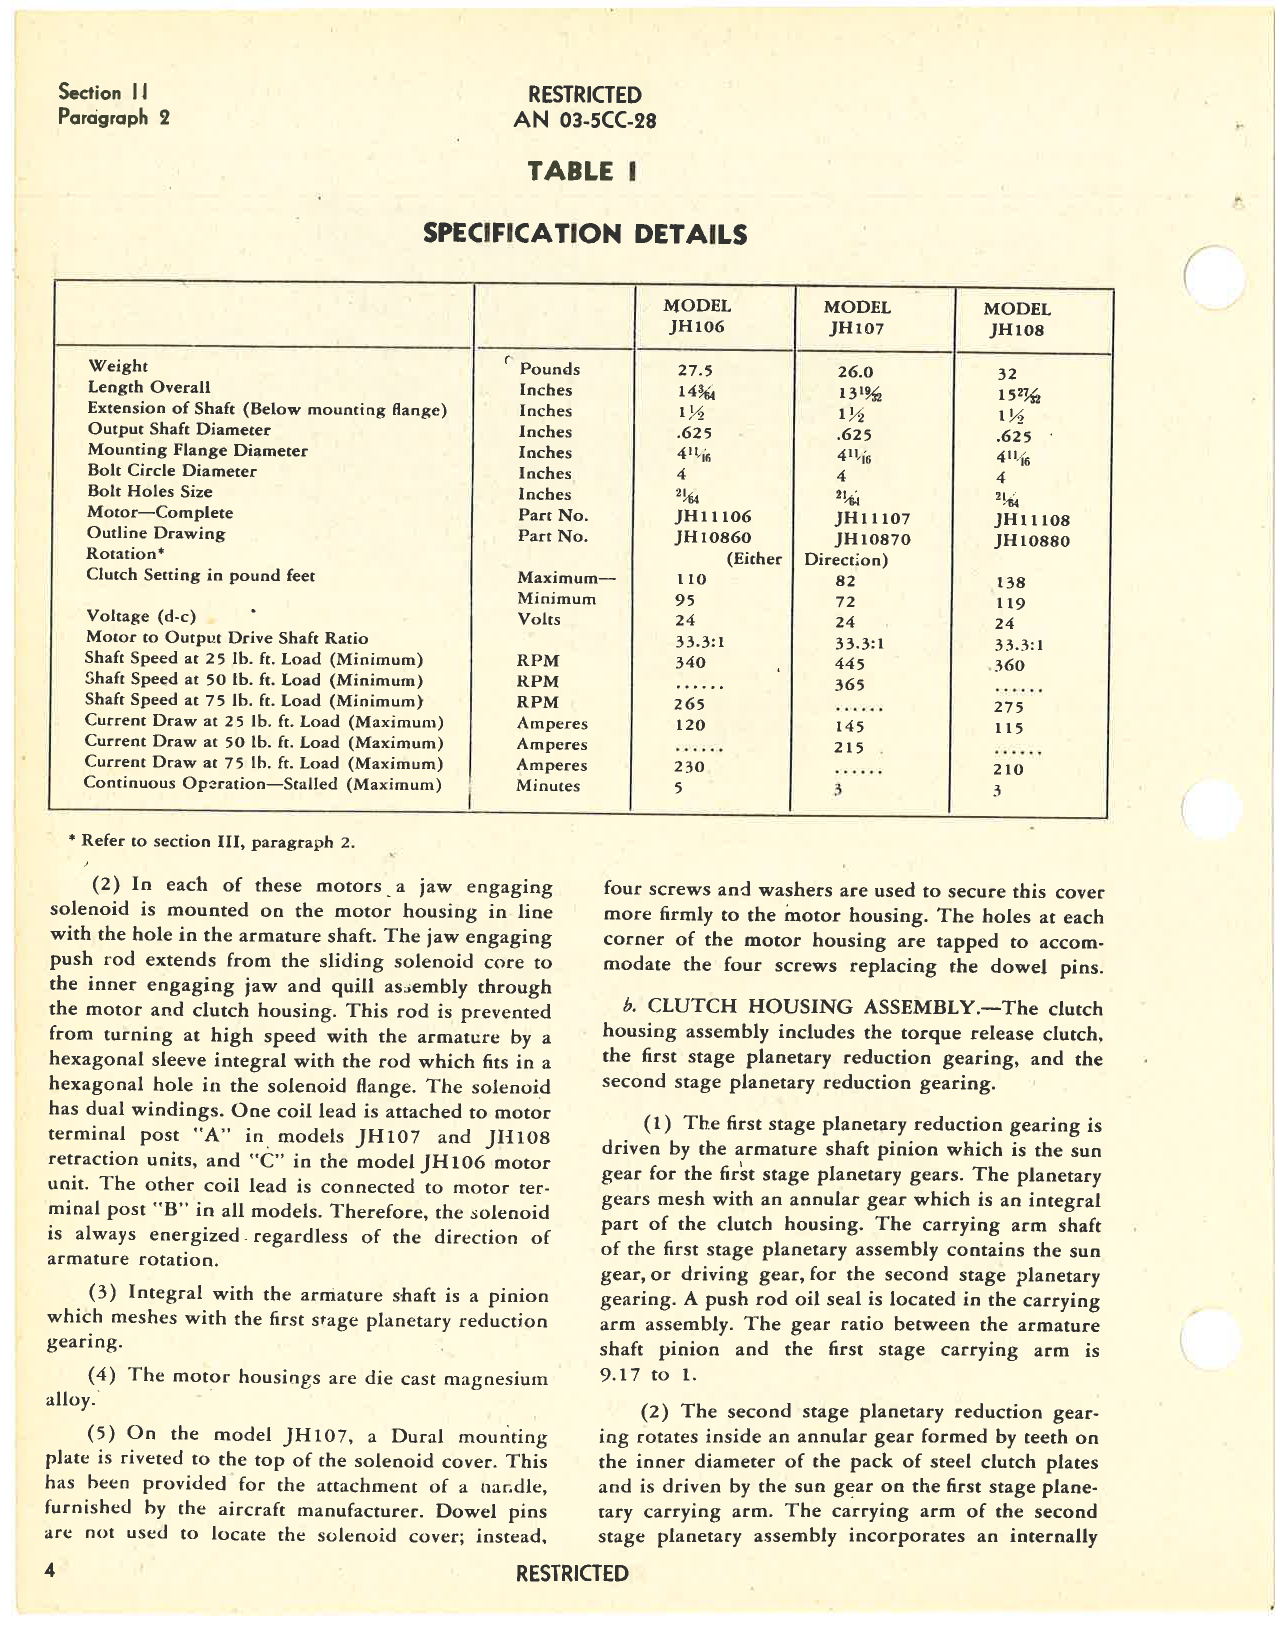 Sample page 8 from AirCorps Library document: Handbook of Instructions with Parts Catalog for Retracting Motors Models JH106, JH107, and JH108